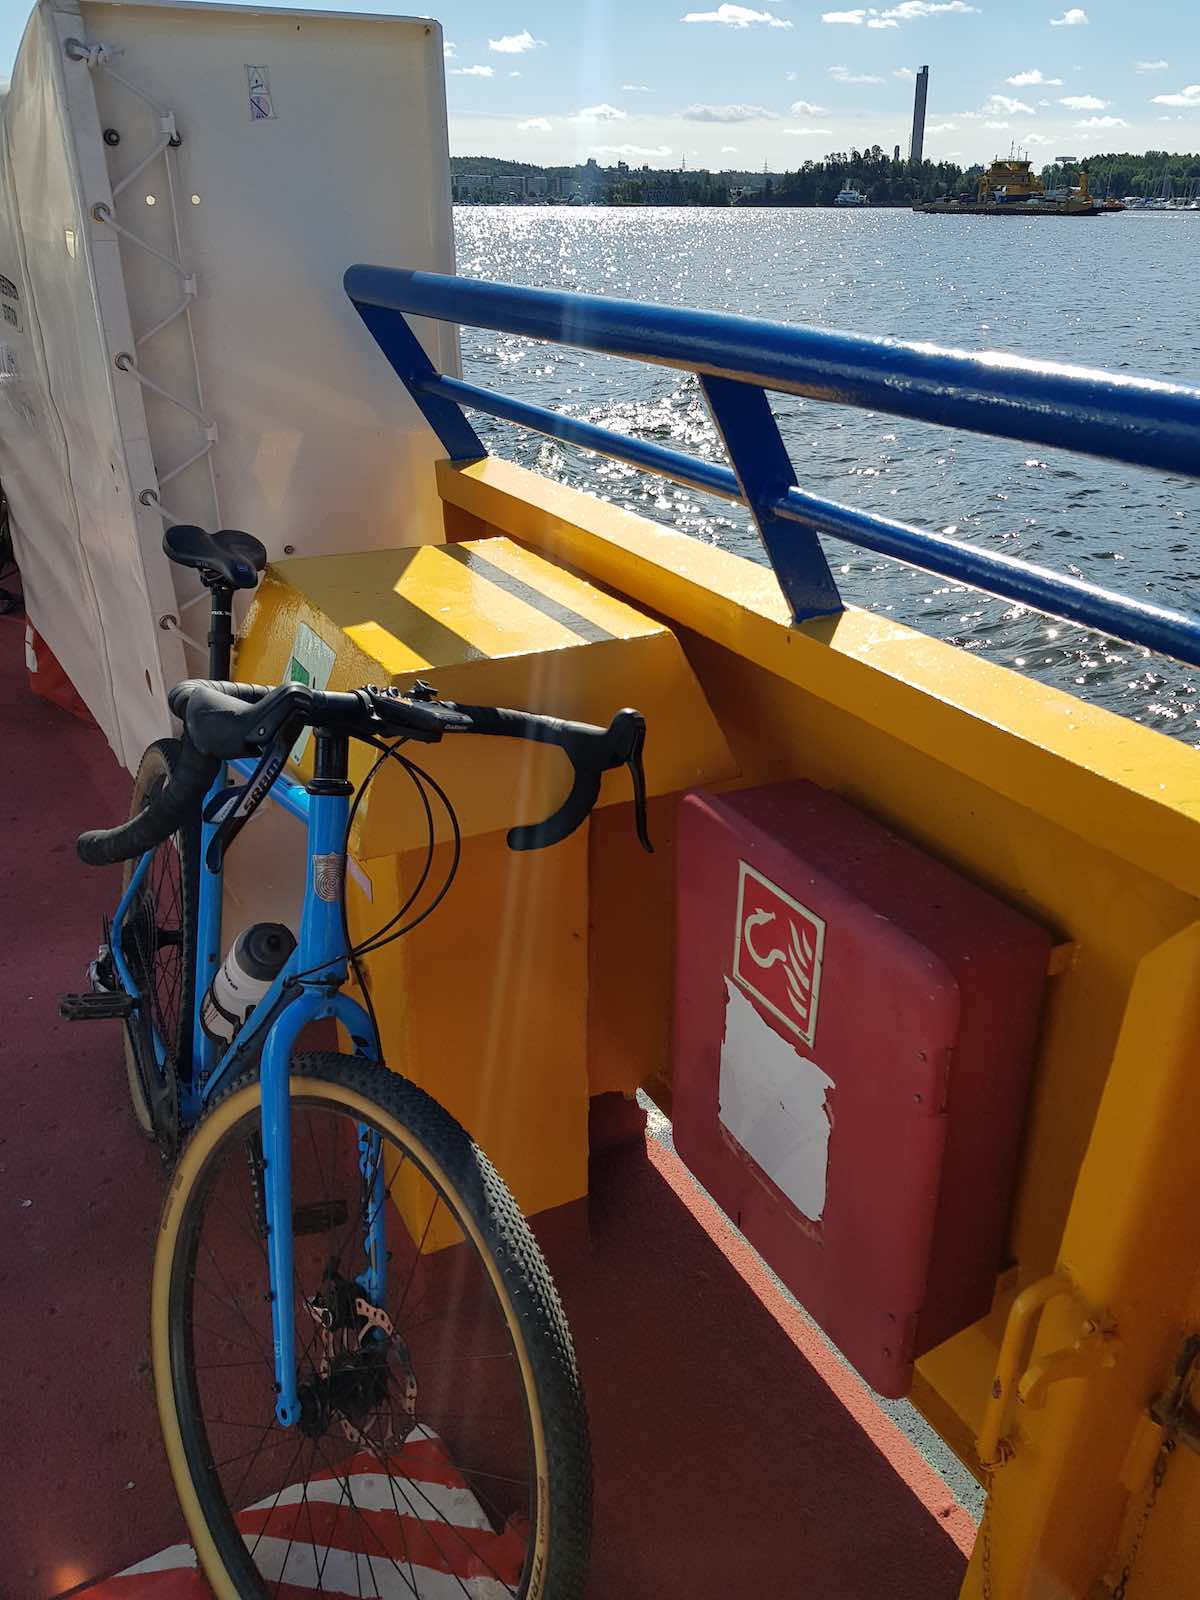 bikerumor pic of the day a blue road bike leans against the side of a ferry overlooking the water and a small city waterfront .